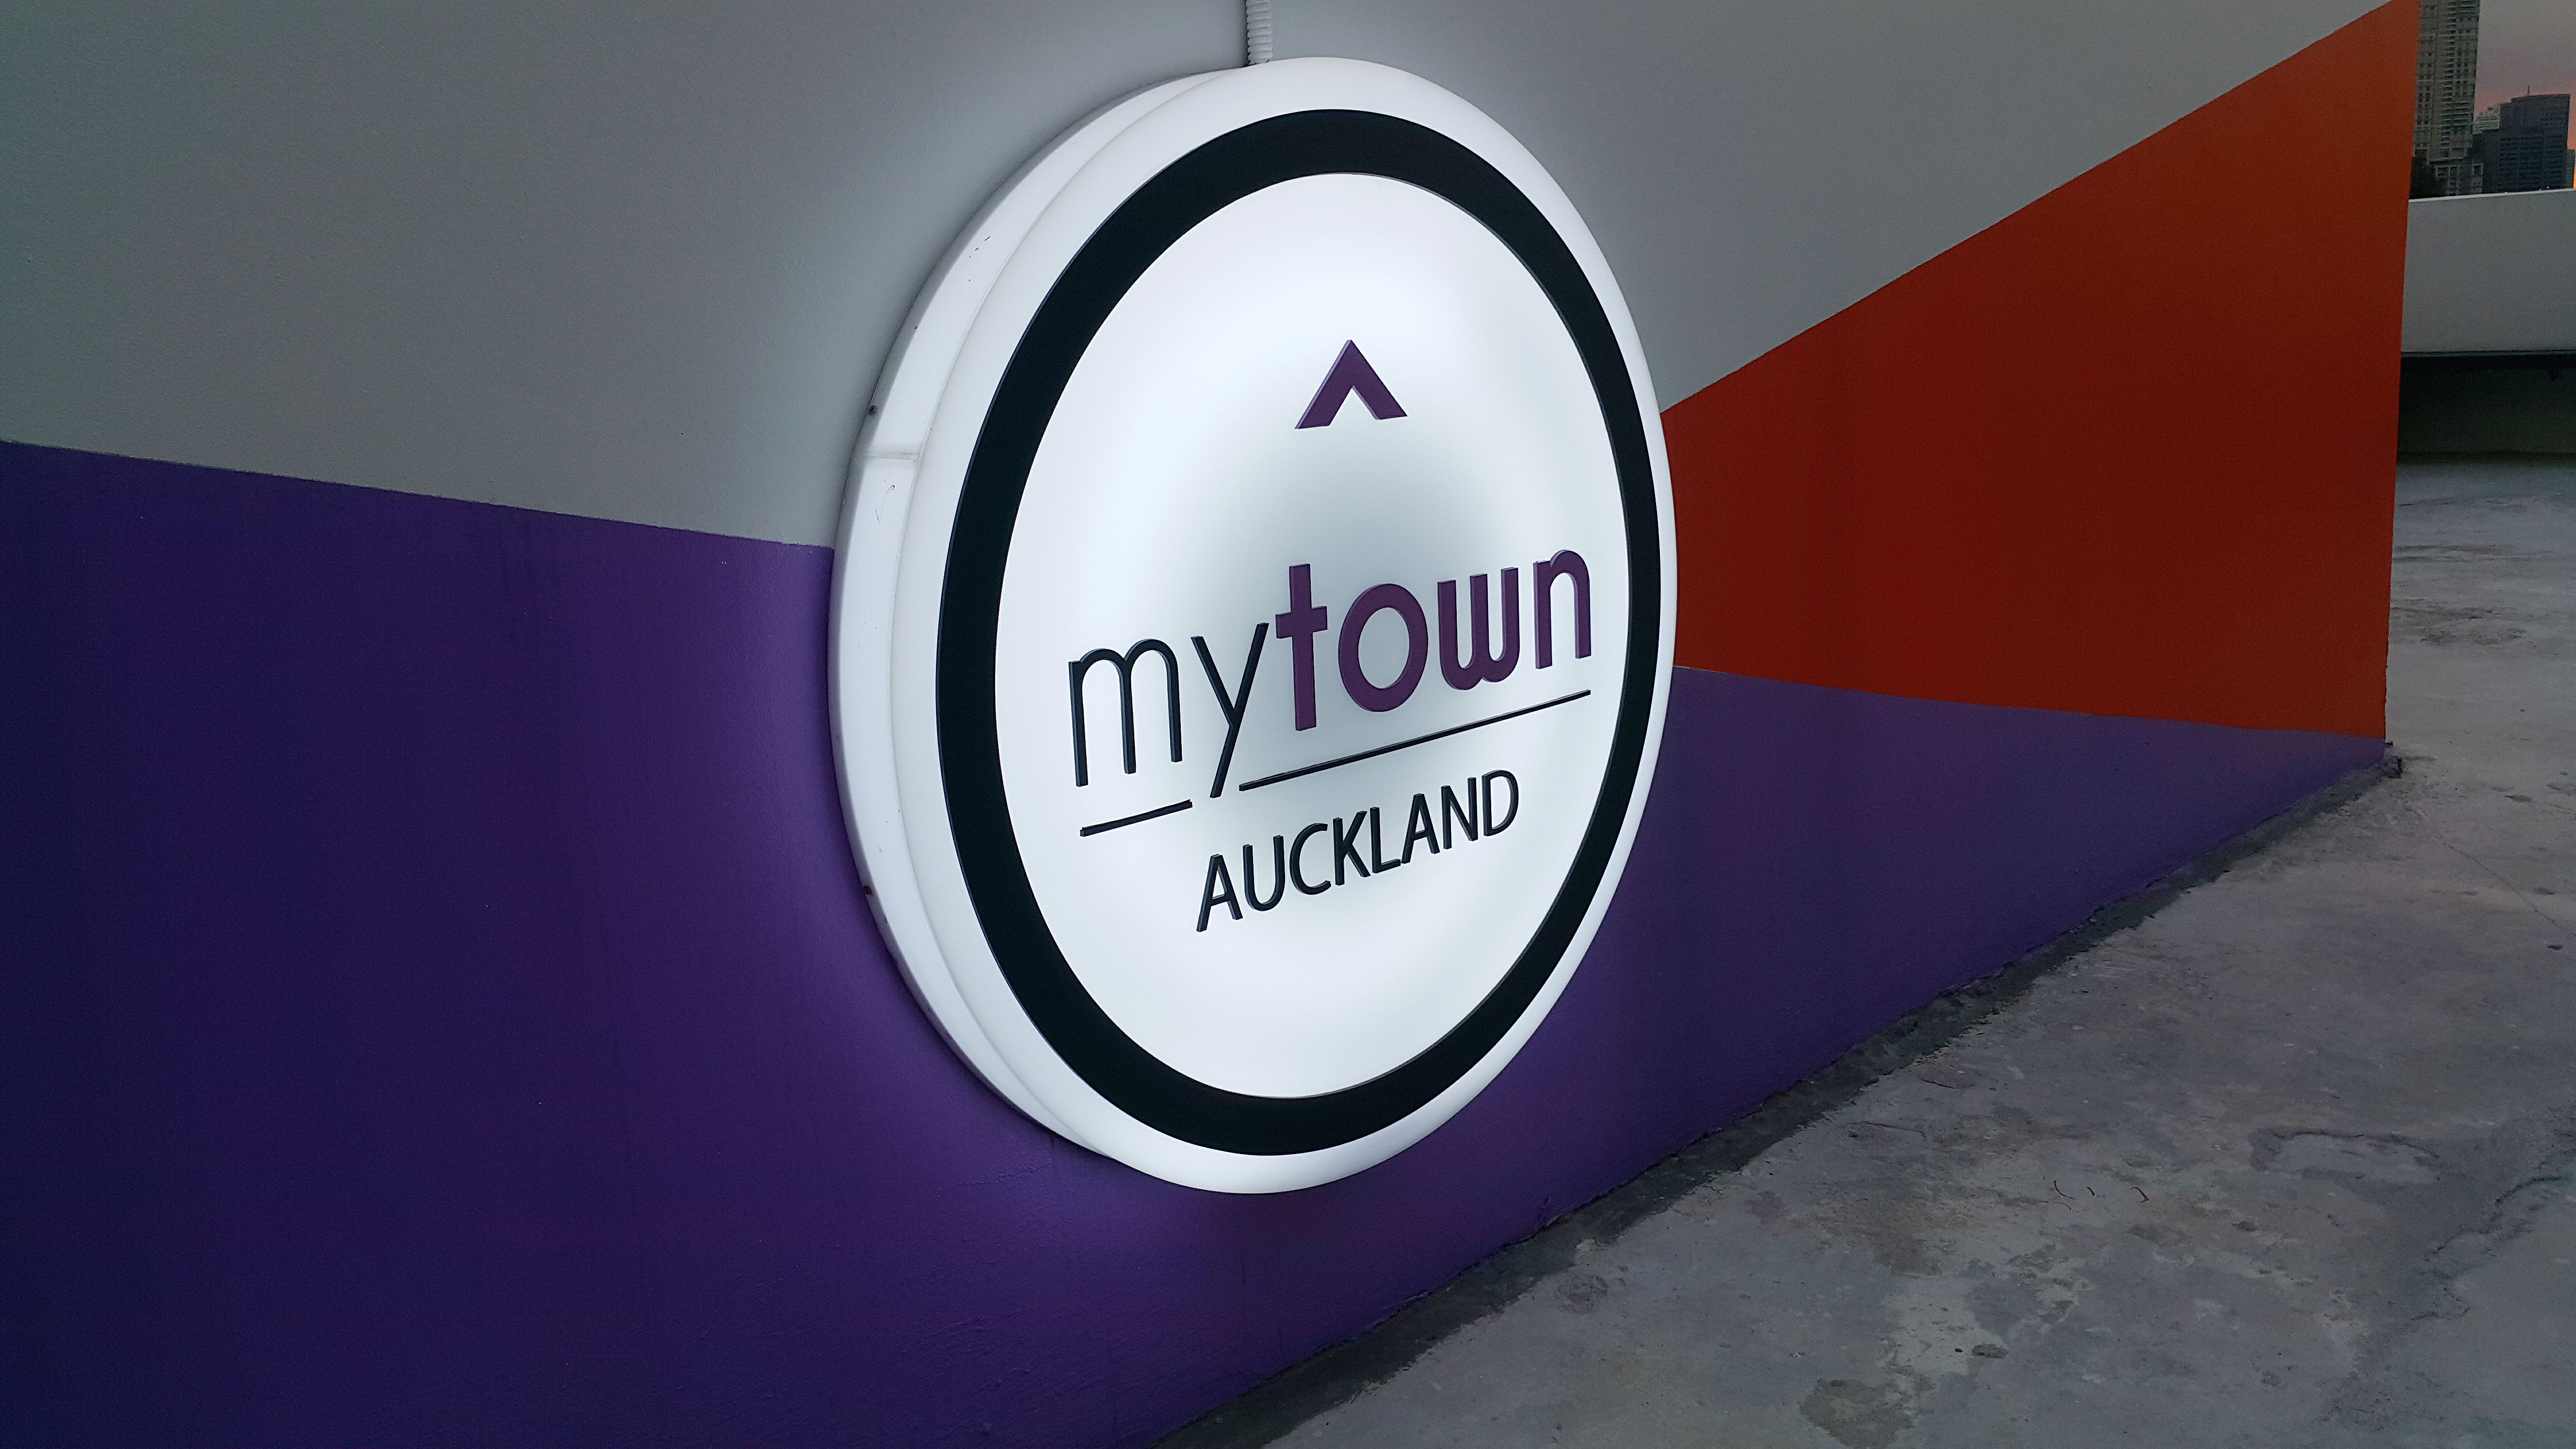 MyTown Auckland offers more “co-living” solutions for Makati- and BGC-based professionals